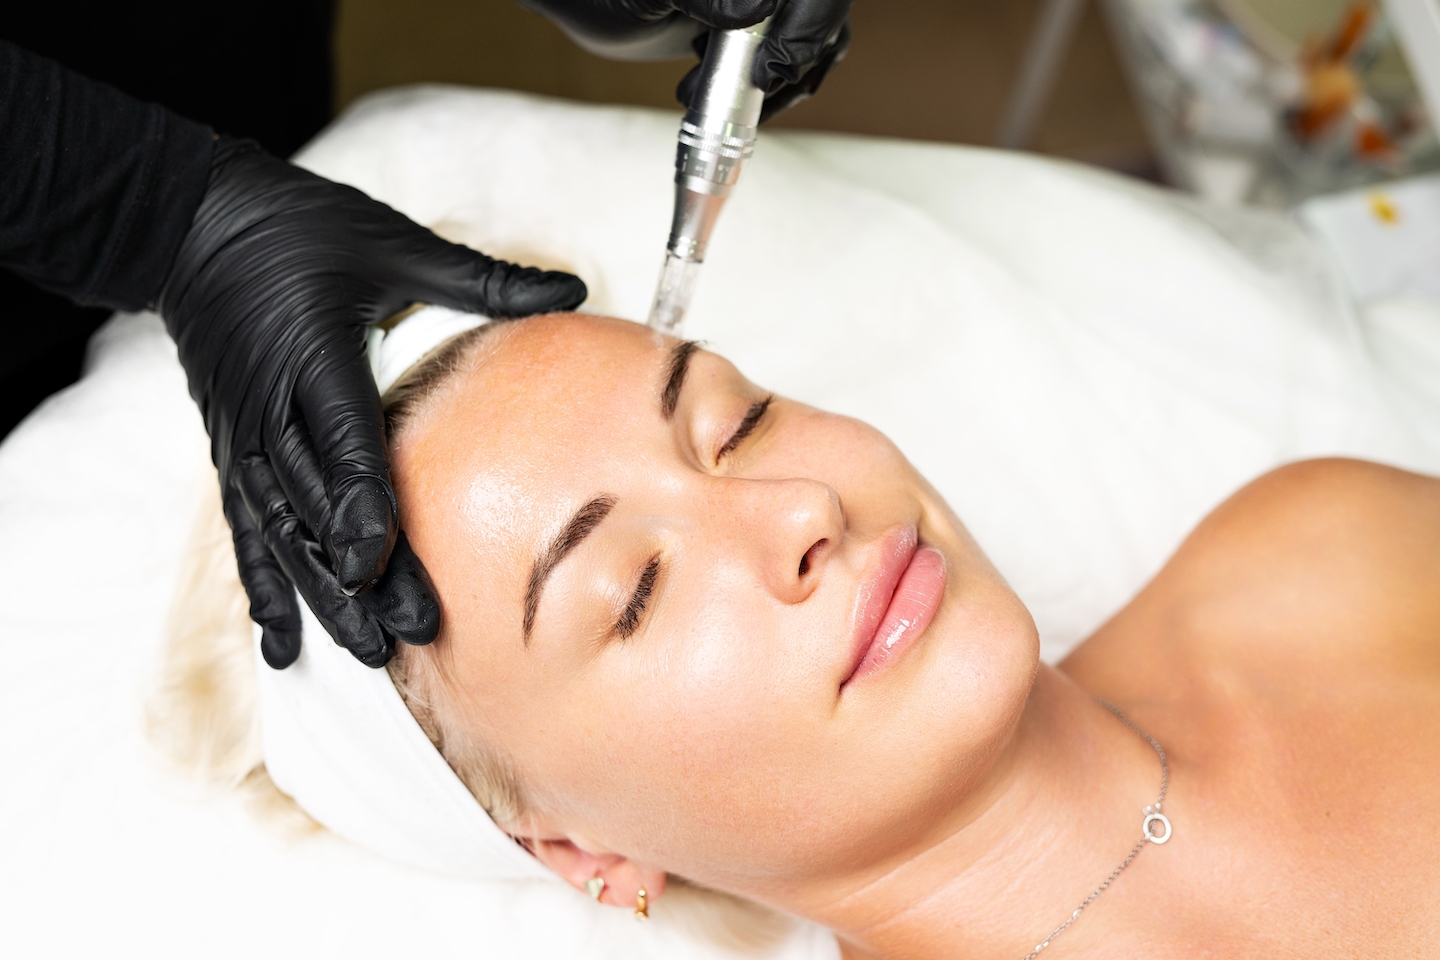 Woman laying down with eyes closed, a close up of her face. A hand wearing a block glove holds her skin in place, with the other hand administering microneedling treatment.